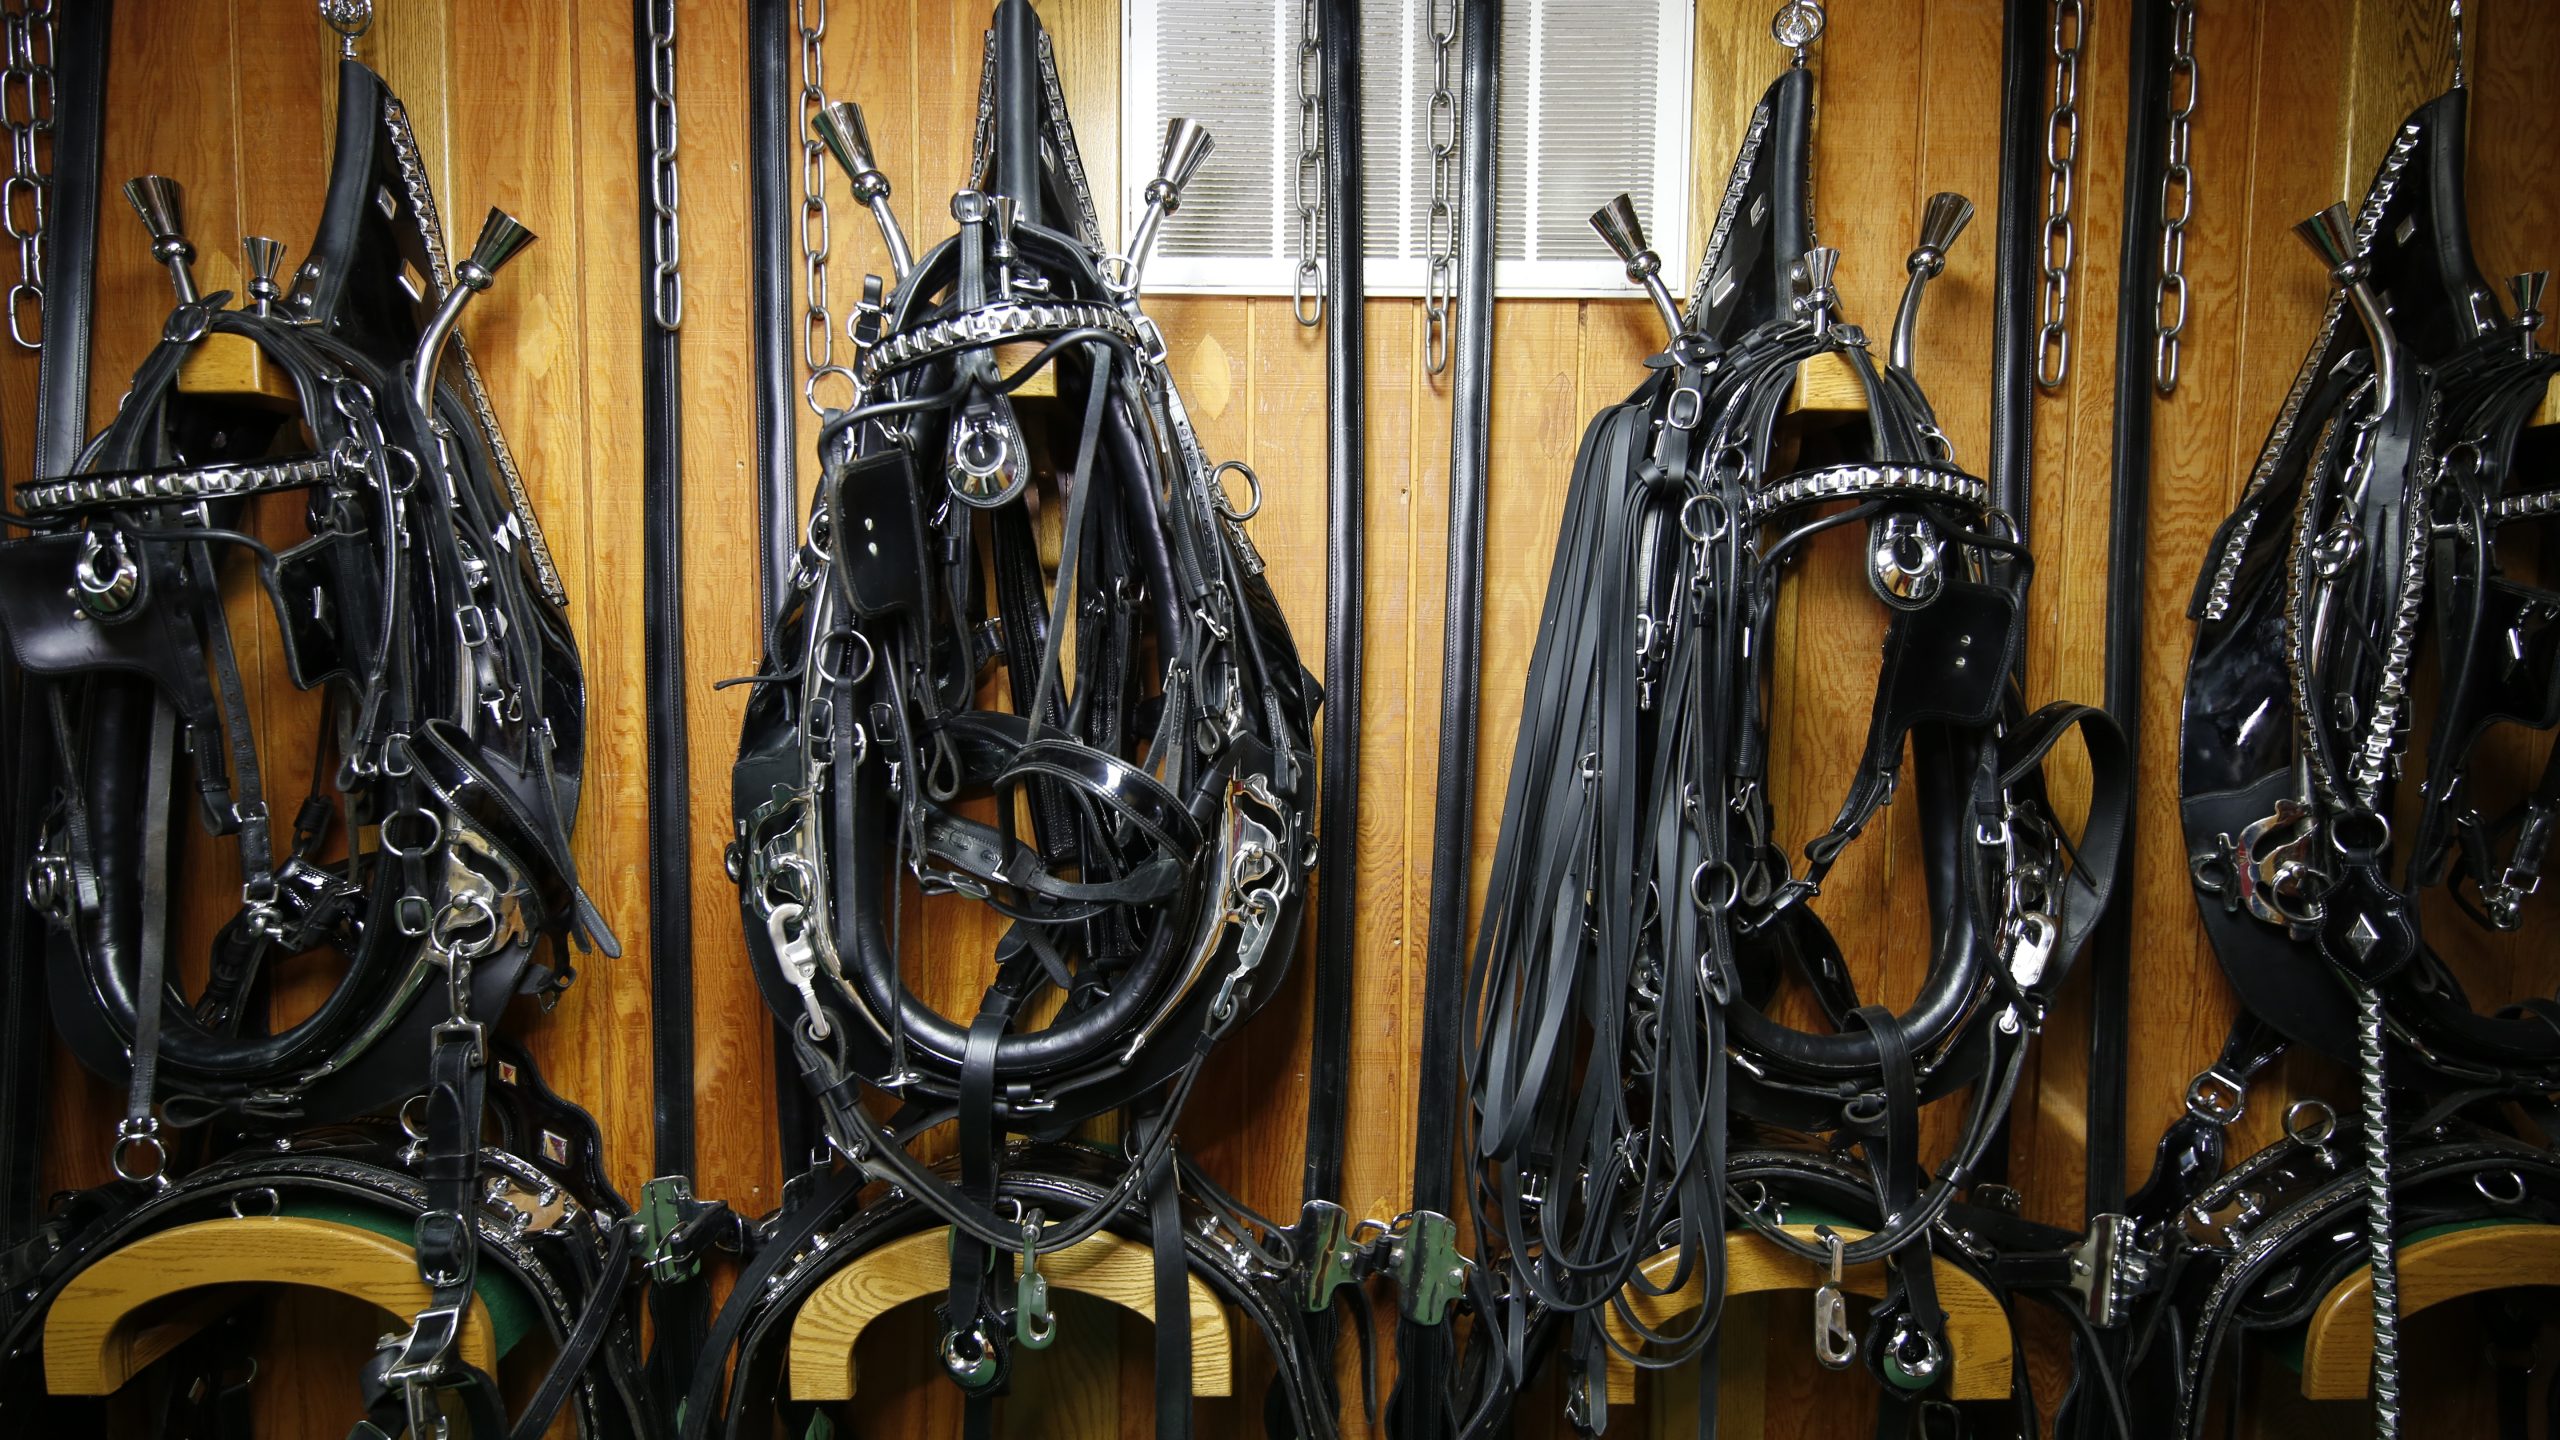 Horse harnesses